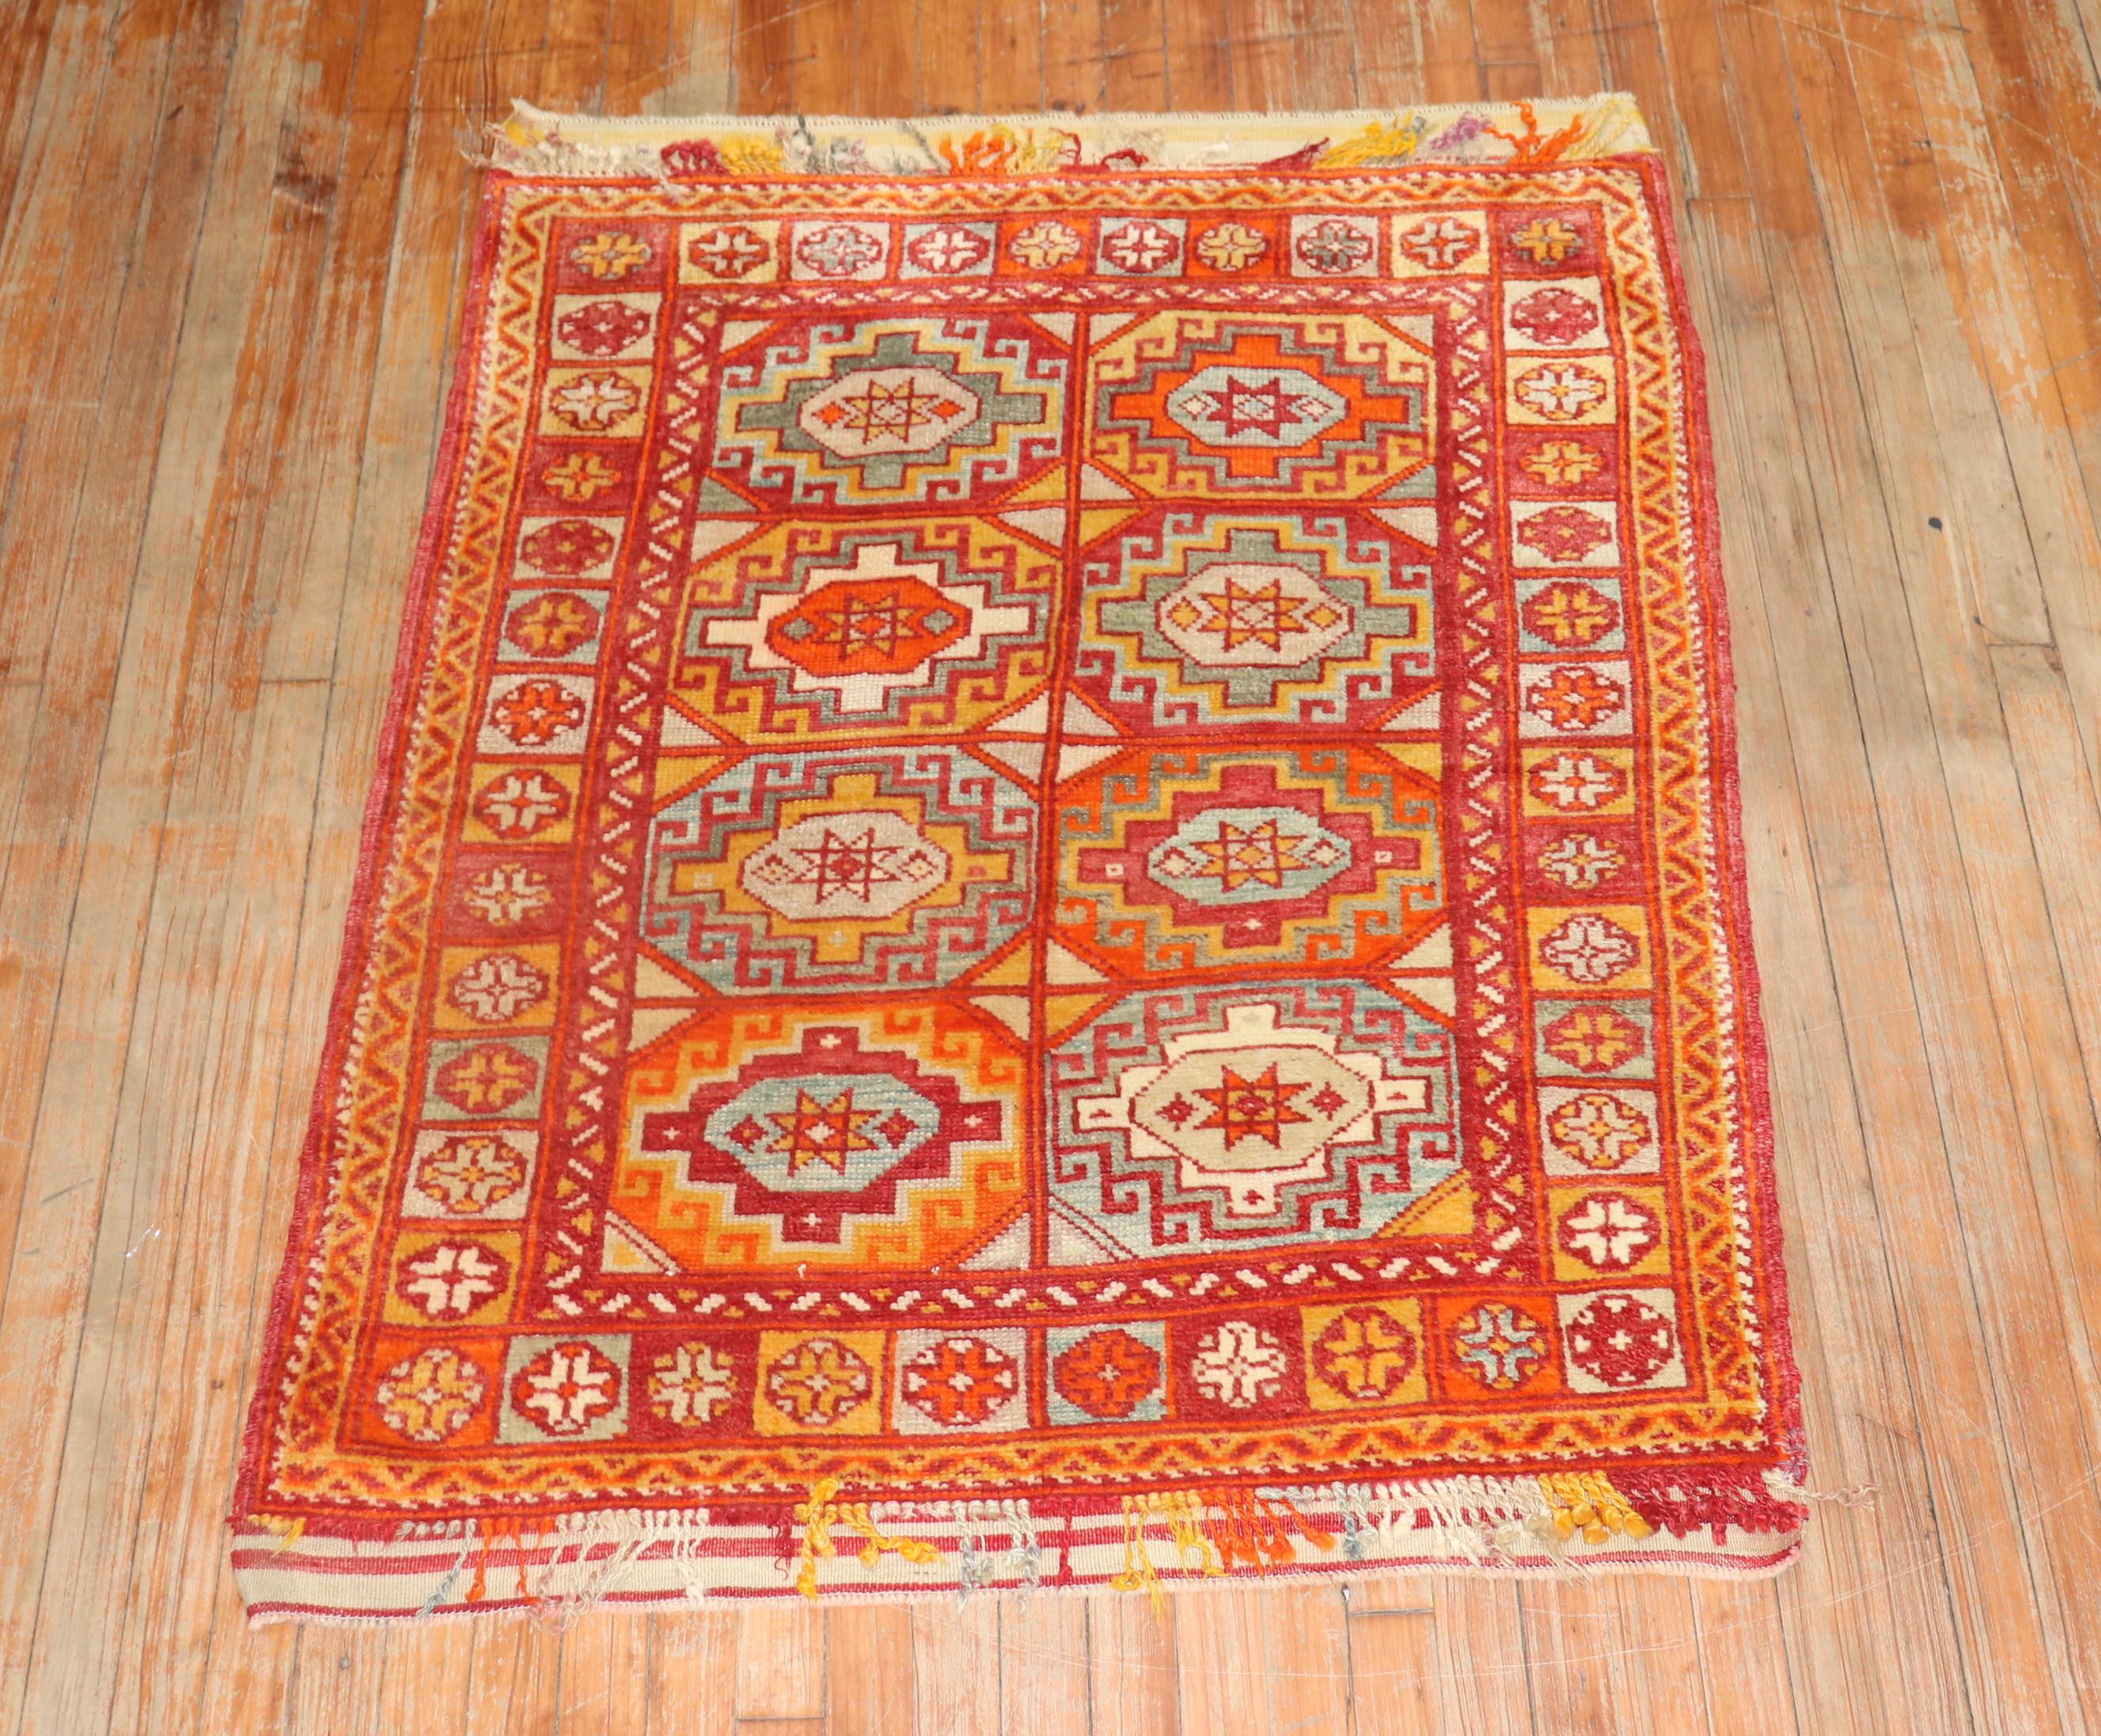 Bright colors highlight this early 20th century Turkish Bergama rug

Measures: 3'6” x 4'4”.